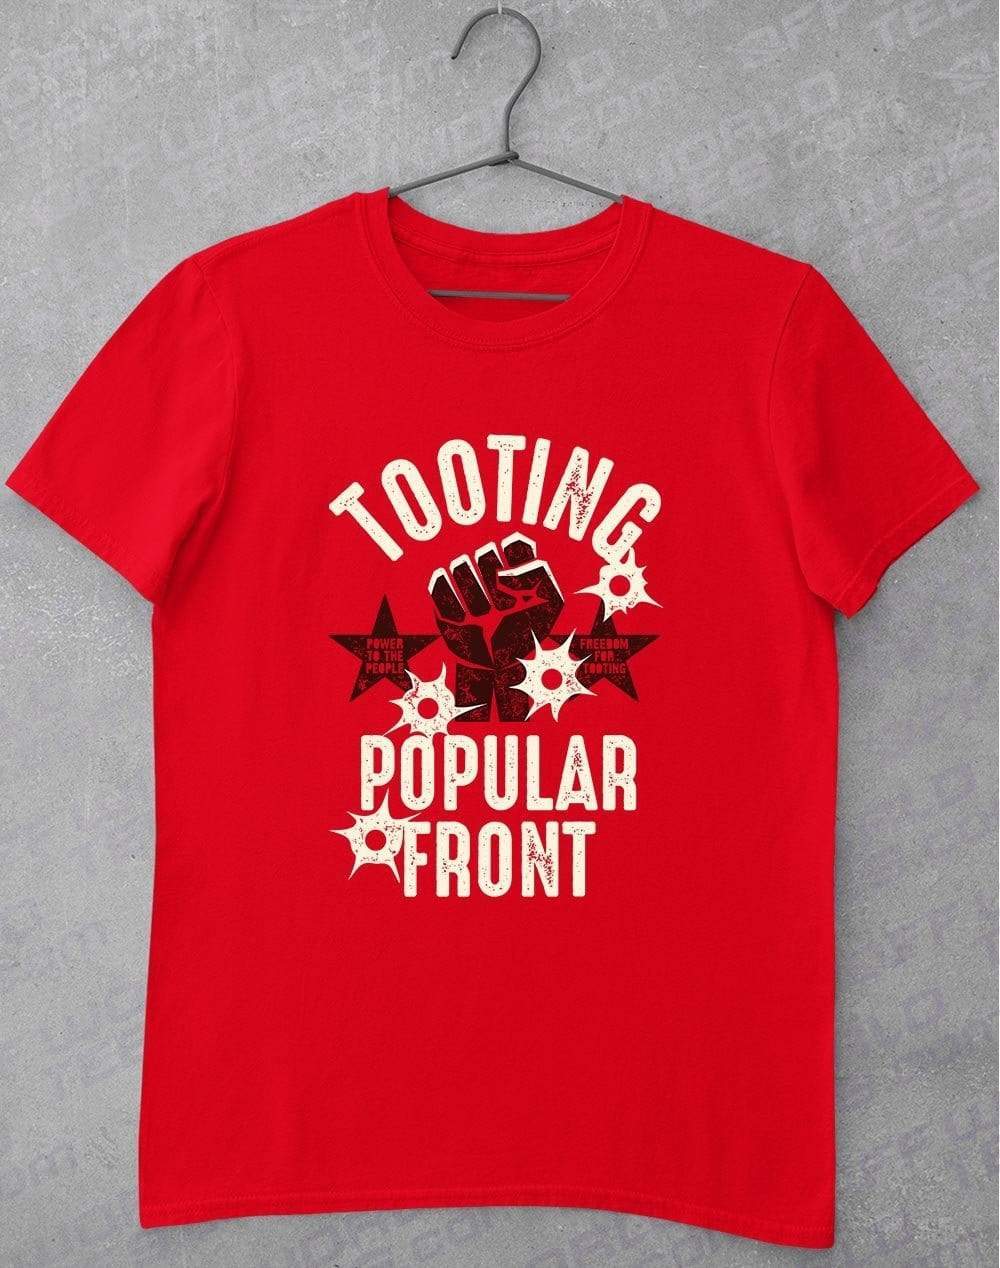 Tooting Popular Front T-Shirt S / Red  - Off World Tees